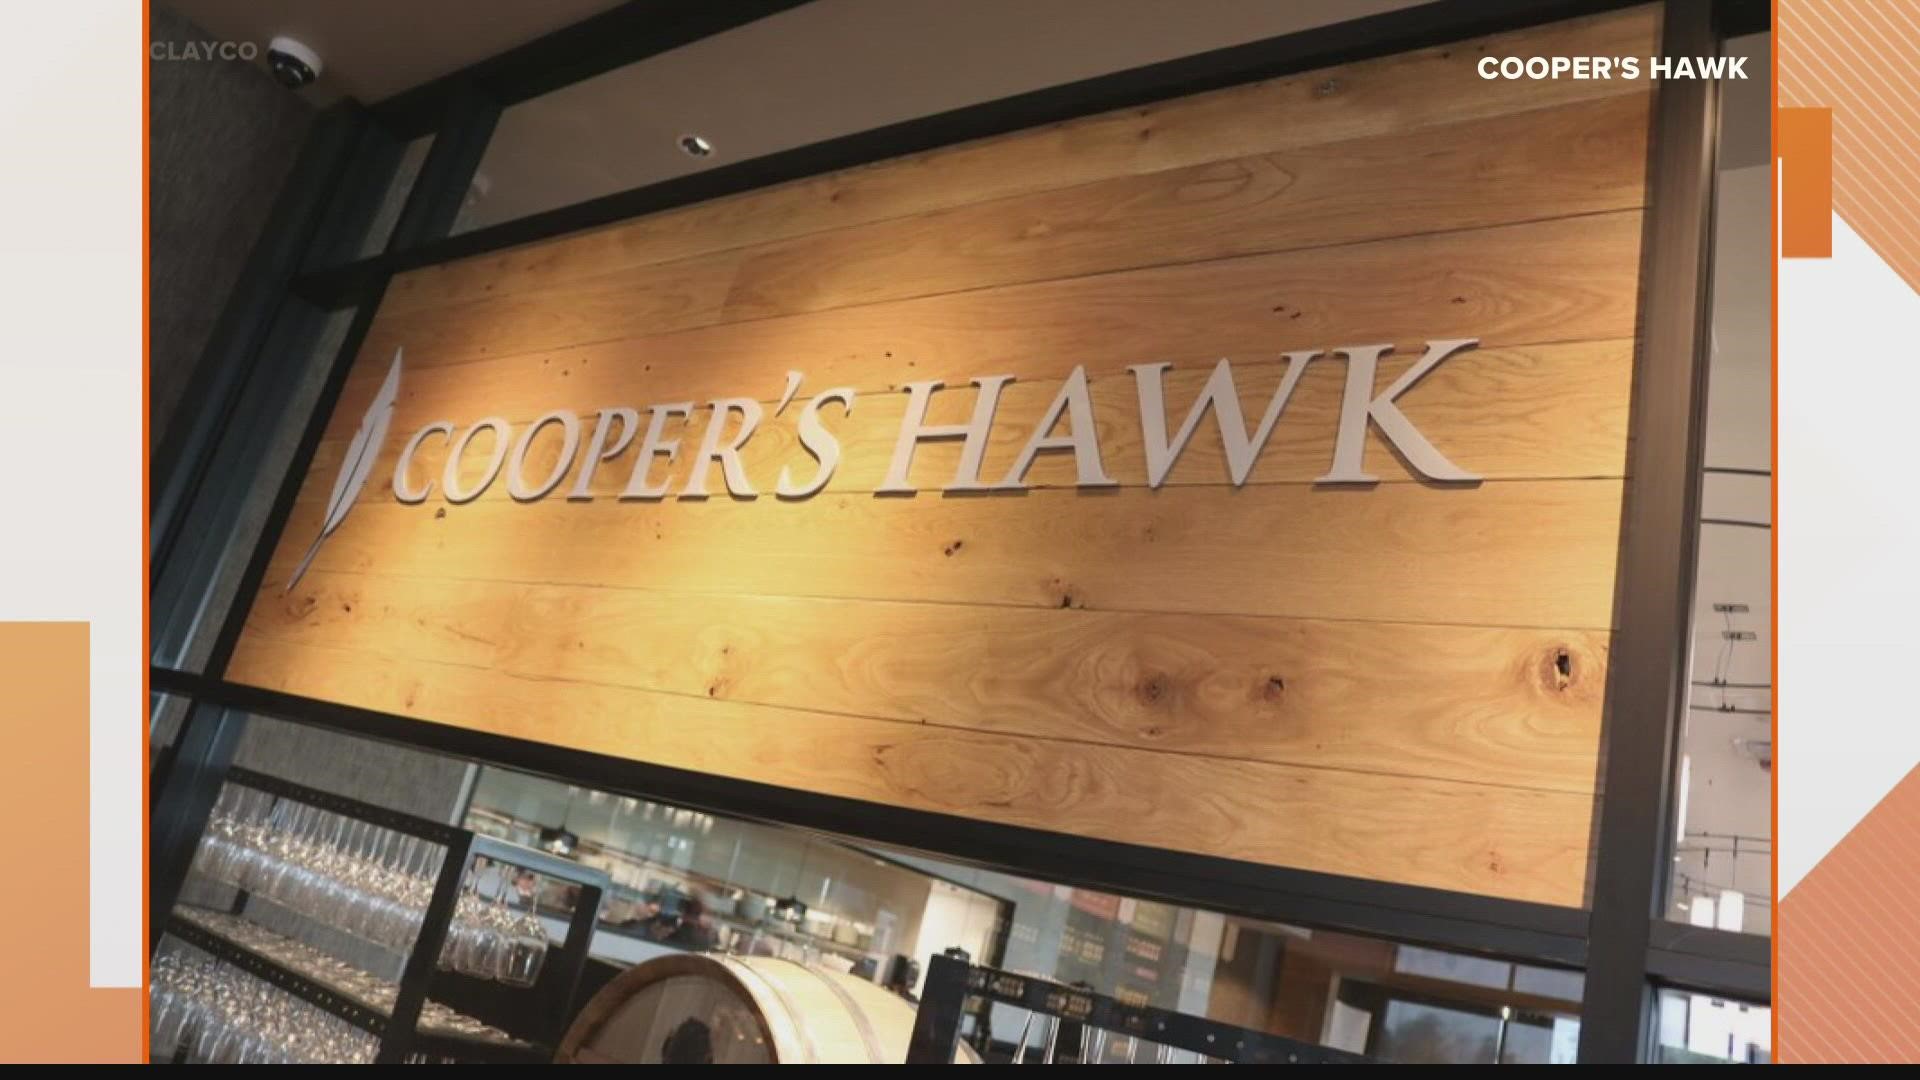 A new wine restaurant is coming to St. Peters. In just two weeks, Cooper’s Hawk will open near the intersection of I-70 and Mid Rivers Mall Drive.